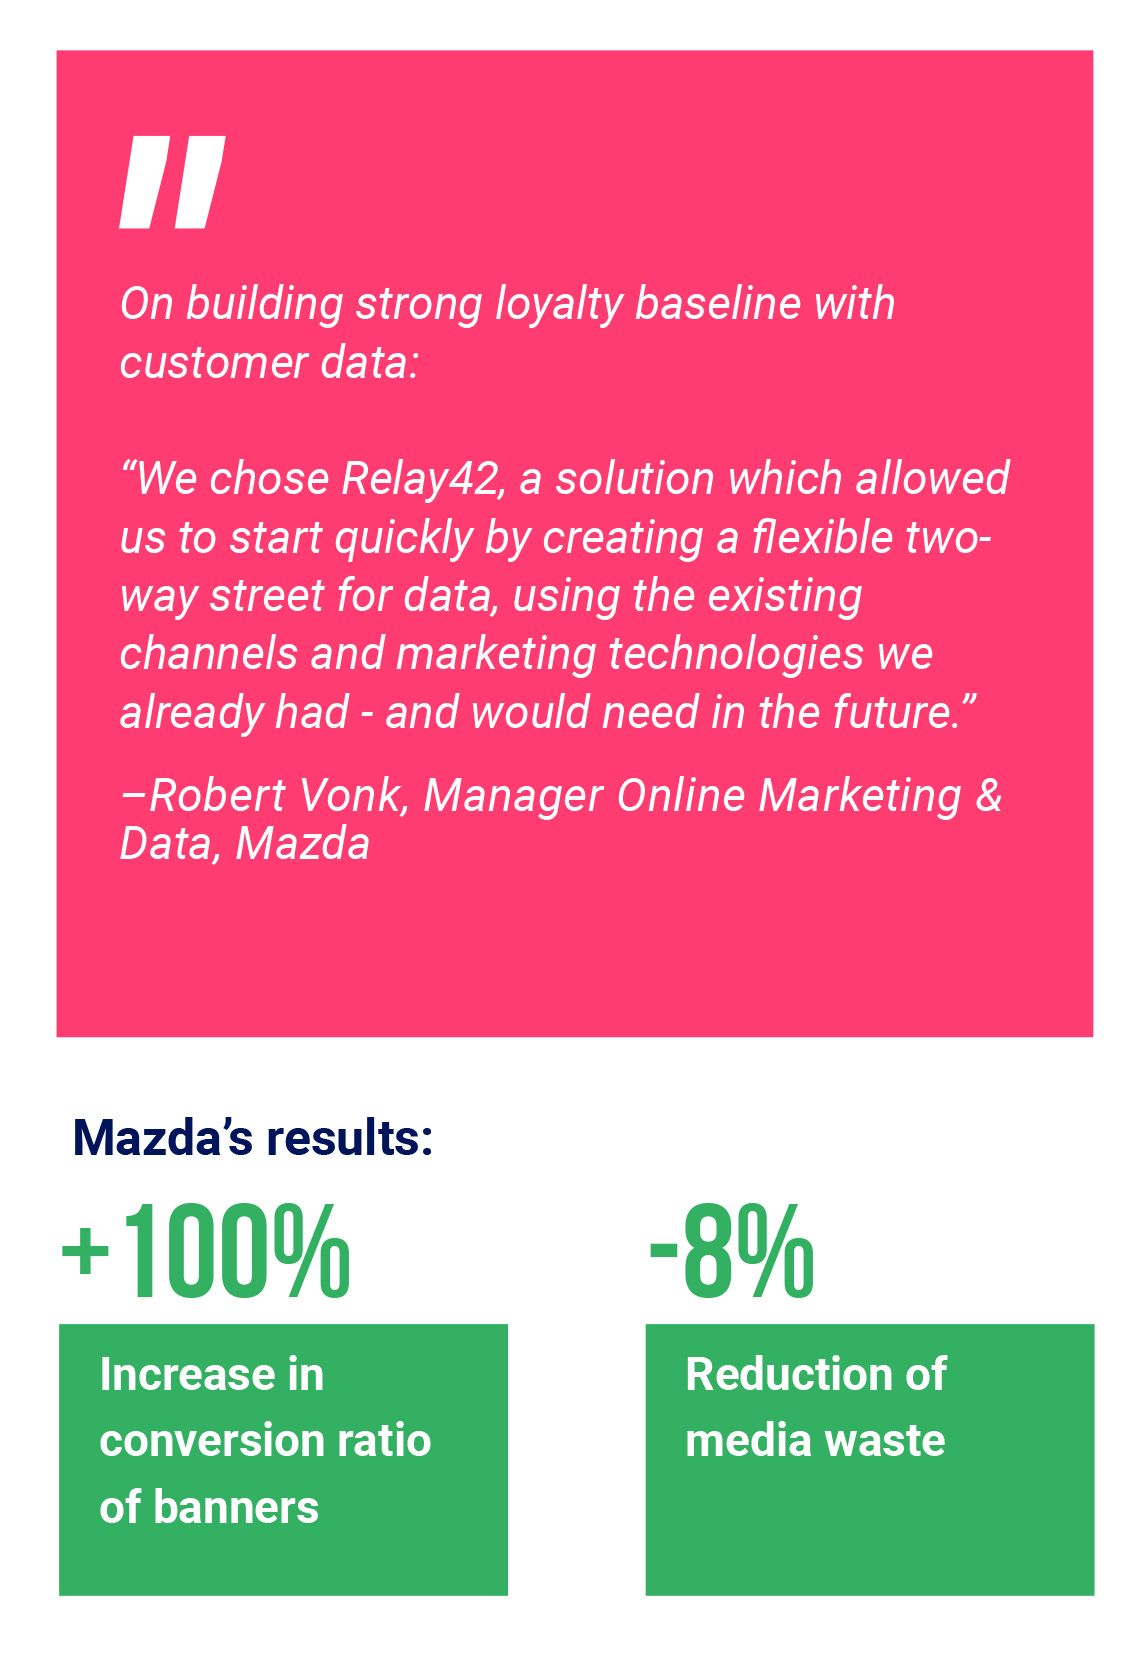 Quote: "We chose Relay42, a solution which allowed us to start quickly by creating a flexible two-way street for data, using the existing channels and marketing technologies we already had - and would need in the future: - Robert Vonk, Manager Online Marketing & Data at Mazda -- 